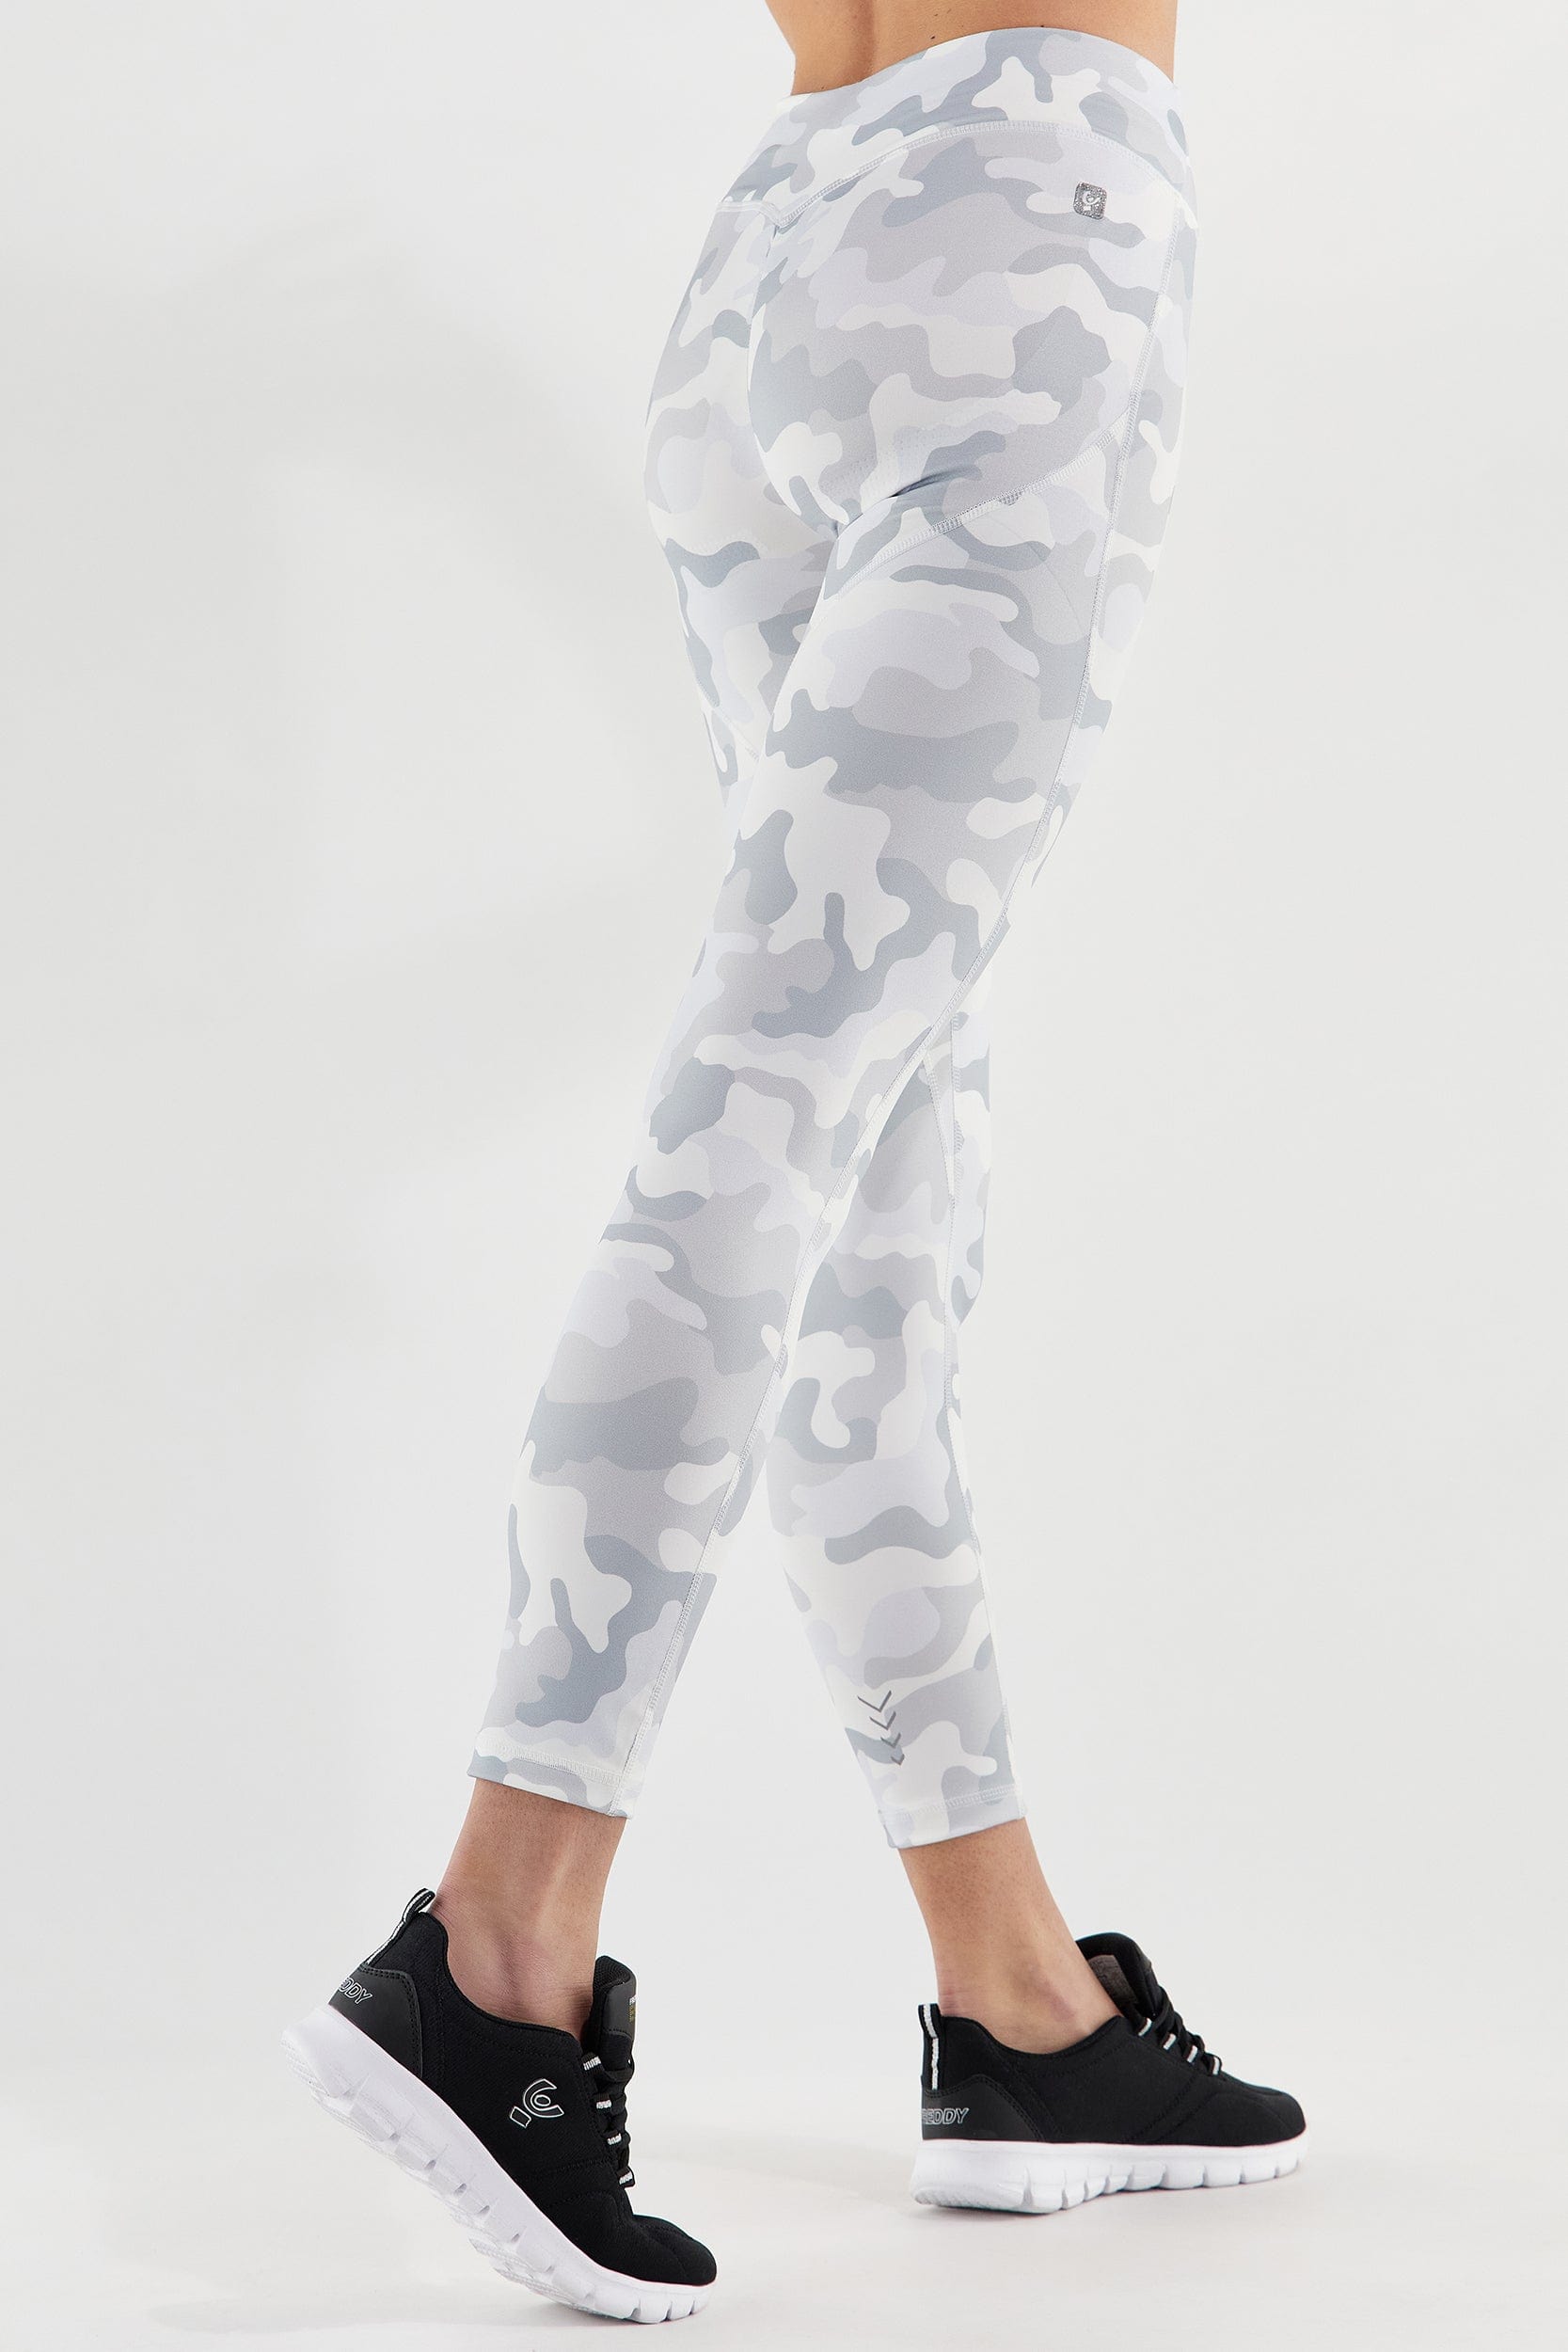 WR.UP® Sport Leggings - Mid Rise - 7/8 Length - White + Grey Camouflage 3